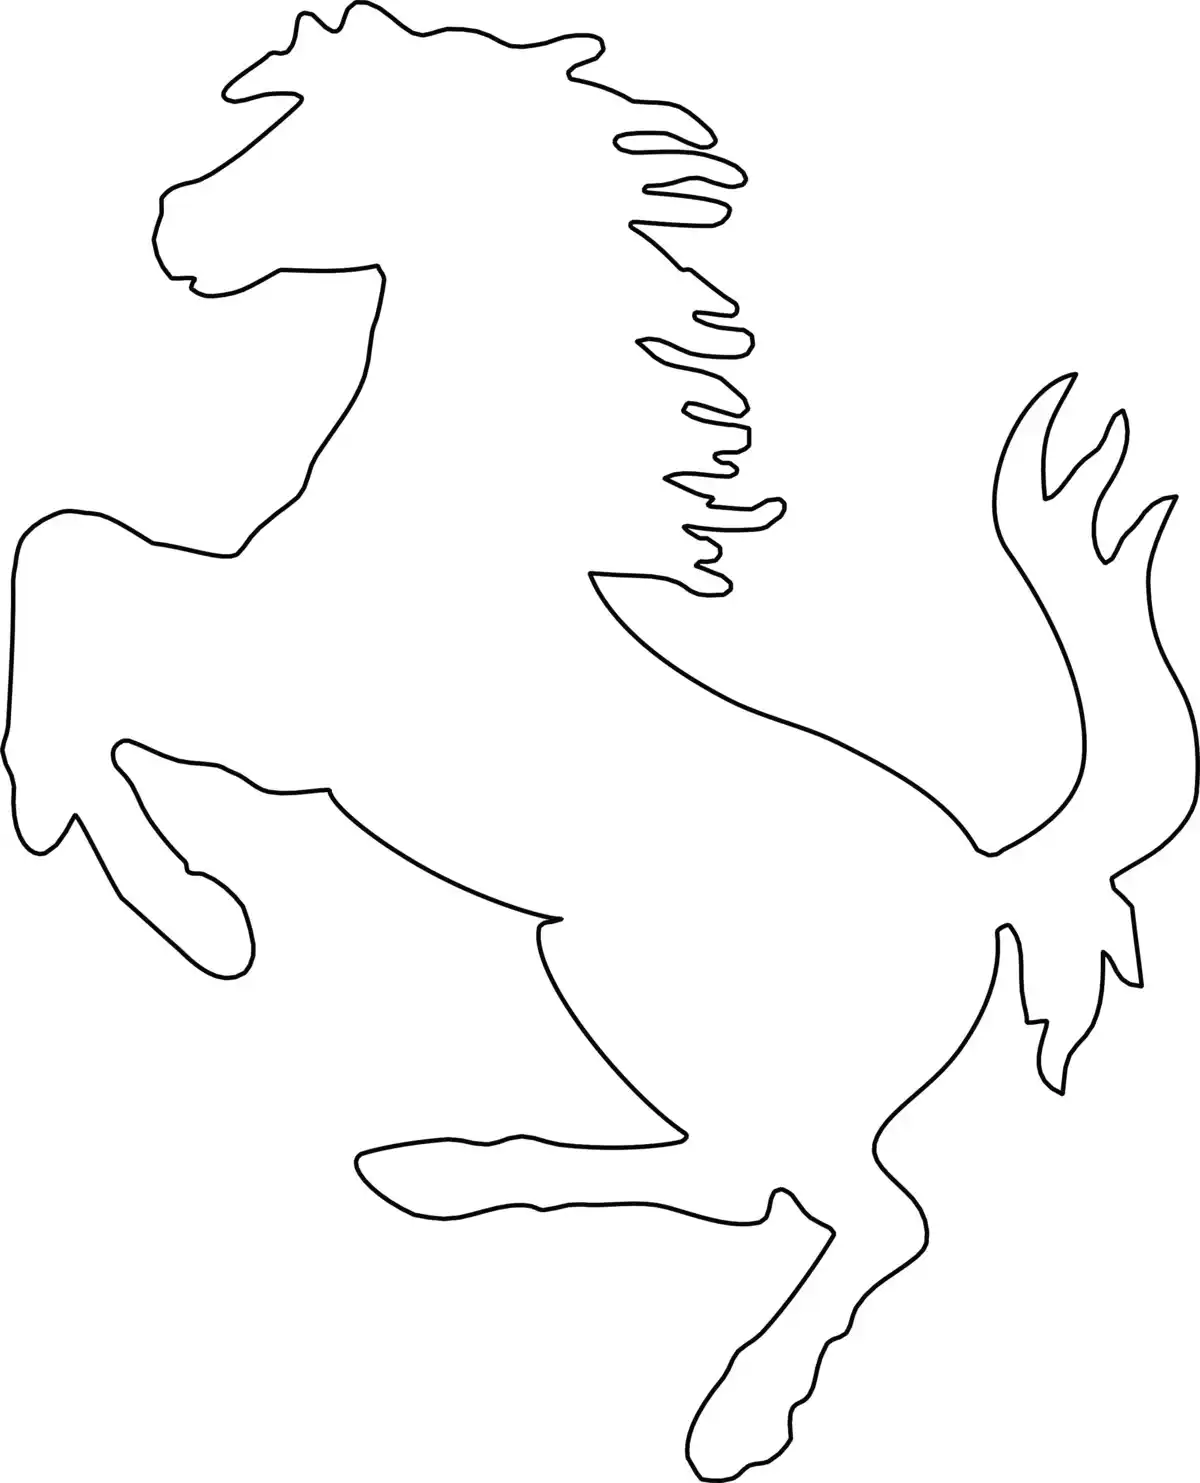 Free Download Coloring PDF, Horse Galloping Silhouette Kids Coloring Pages Pdf